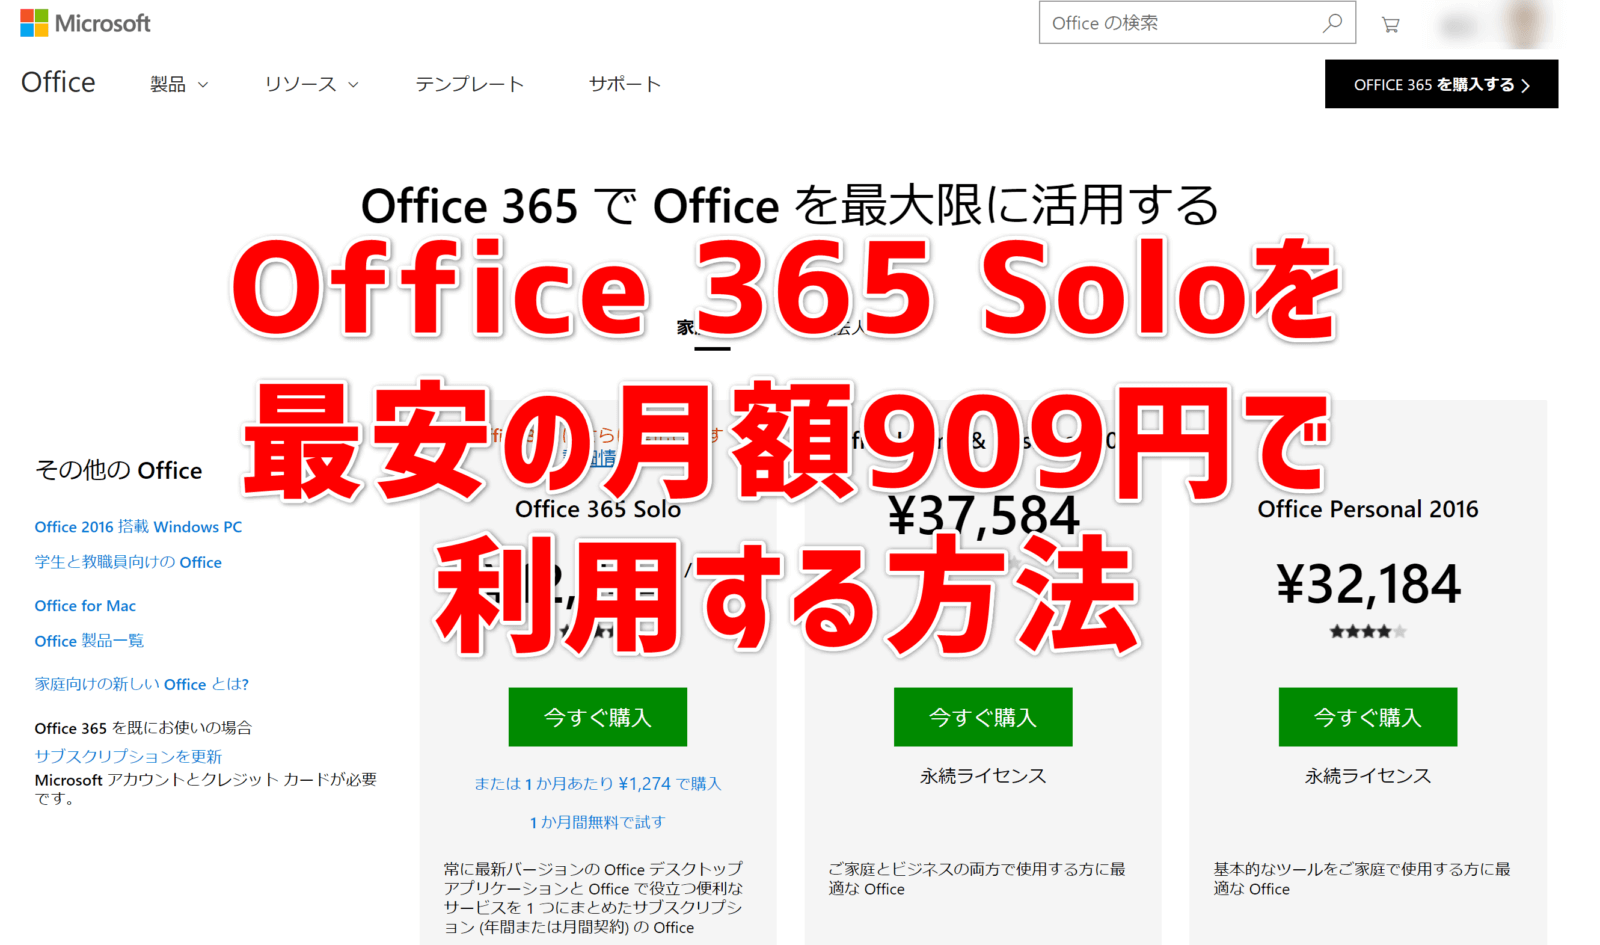 TIPS】Office 365 Soloを最安値の月額909円(税込)でゲットする方法（要Android） | ひとぅブログ